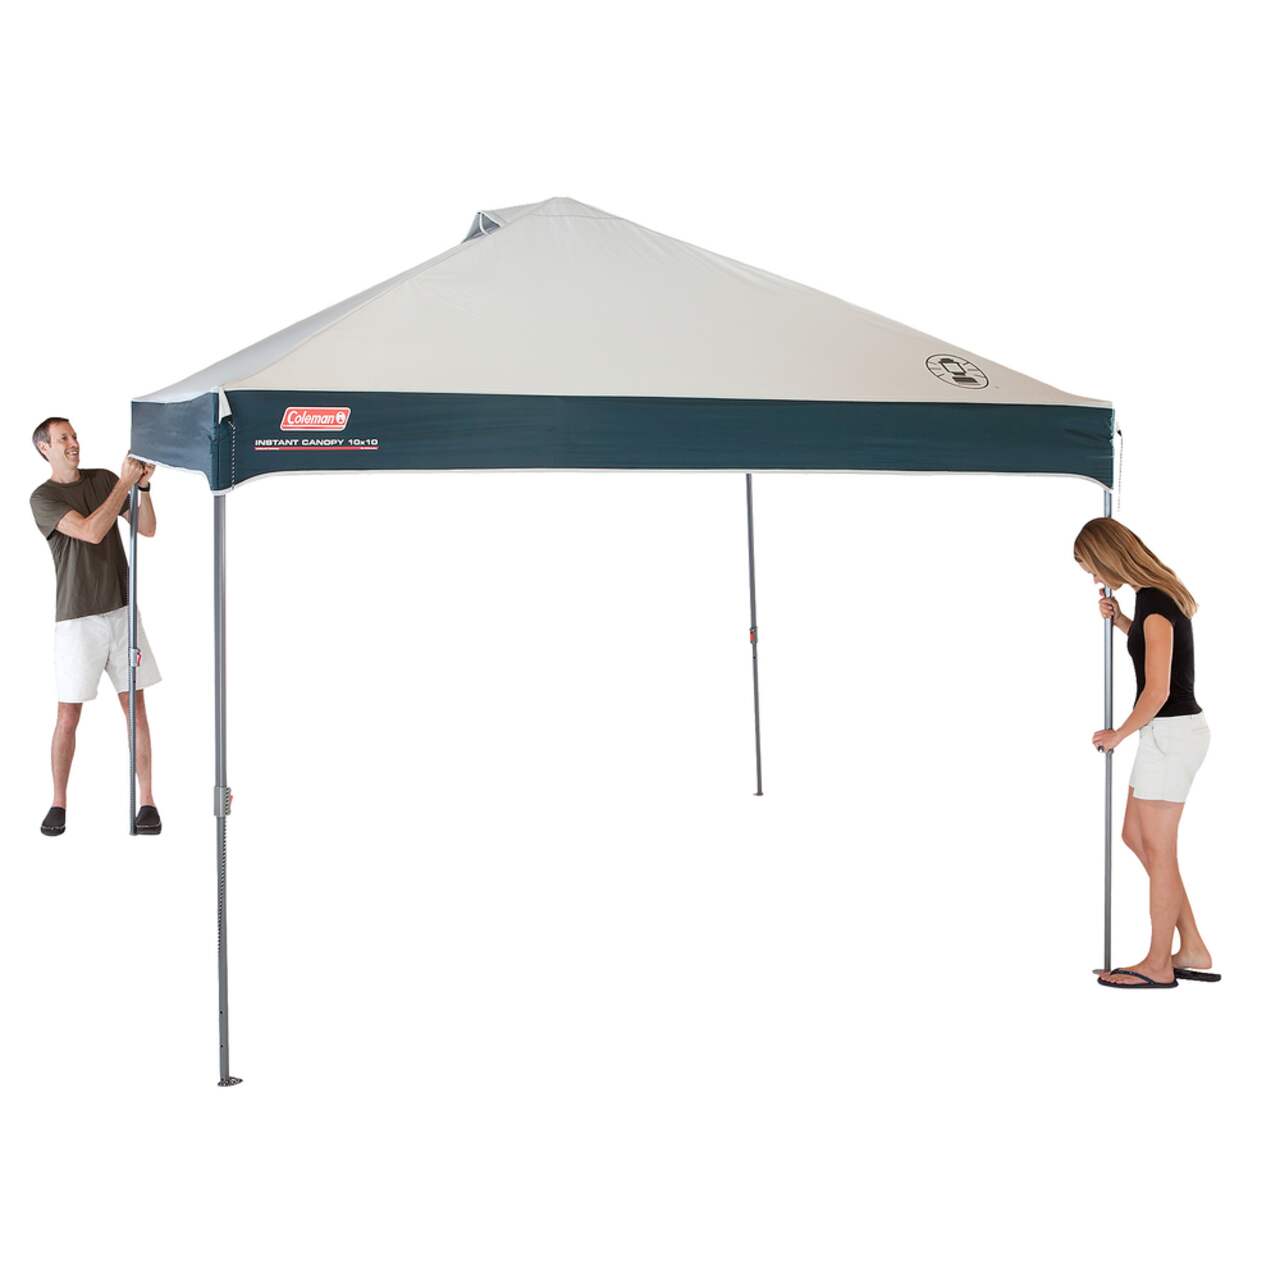 Coleman 3 m × 3 m (10 ft. × 10 ft.) Instant Screened Canopy